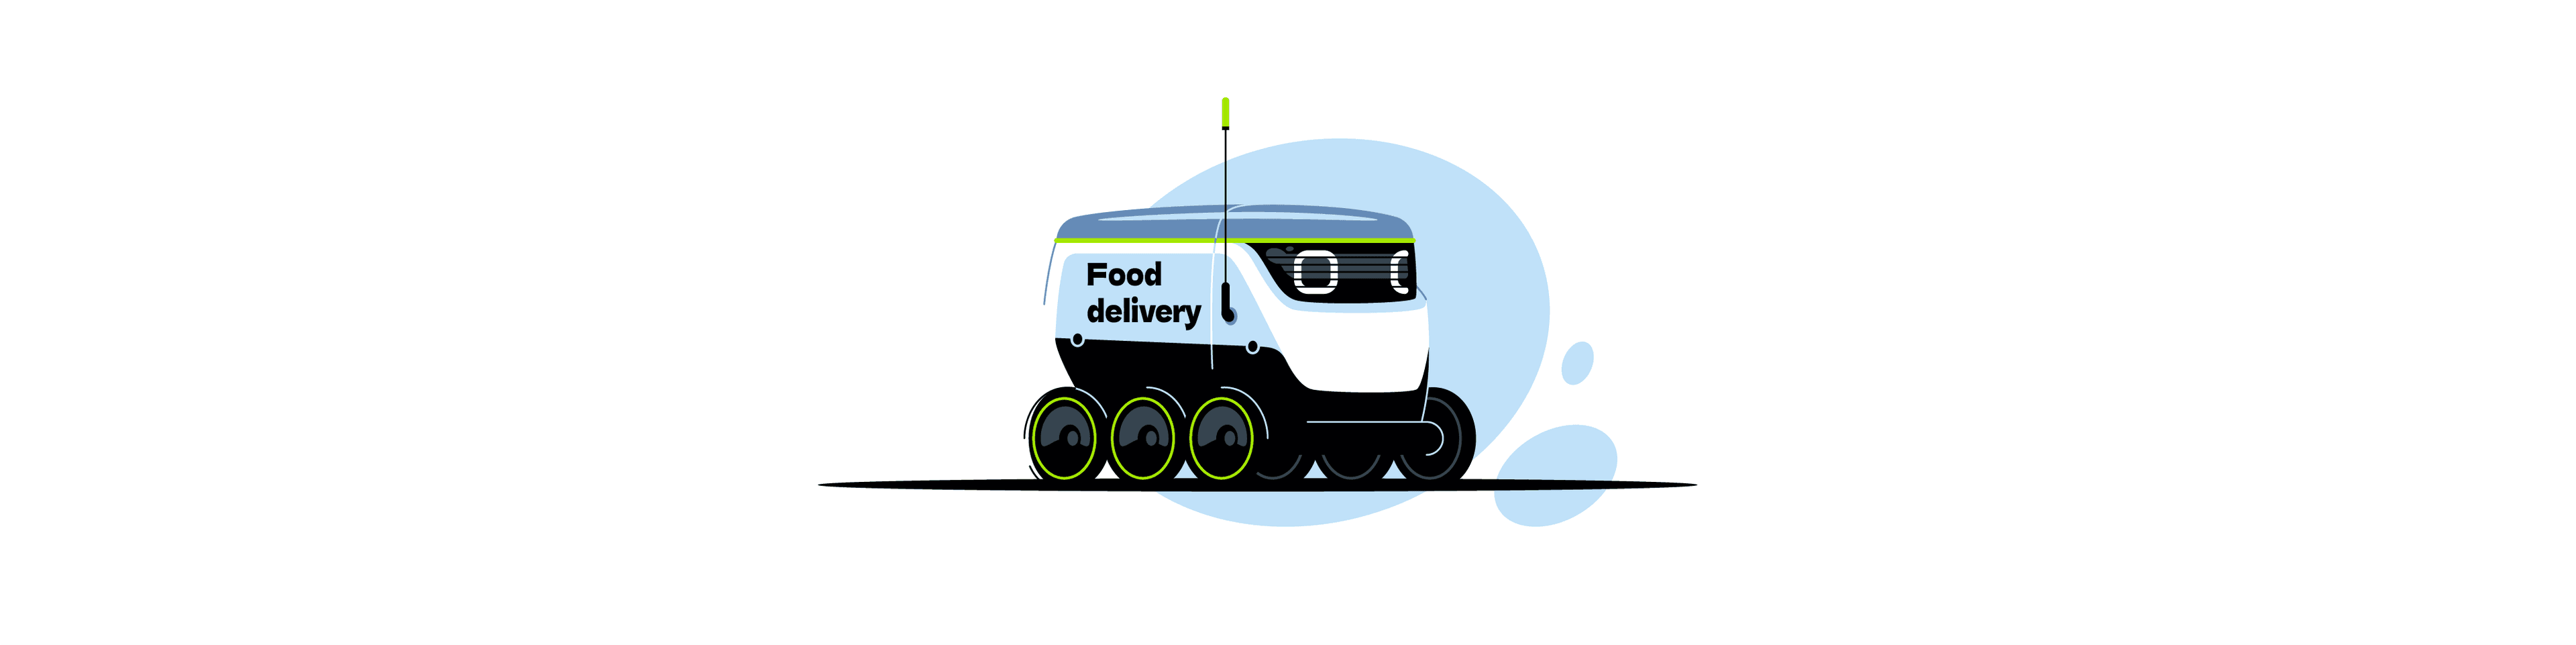 7 Best Food Delivery Services To Get Inspired